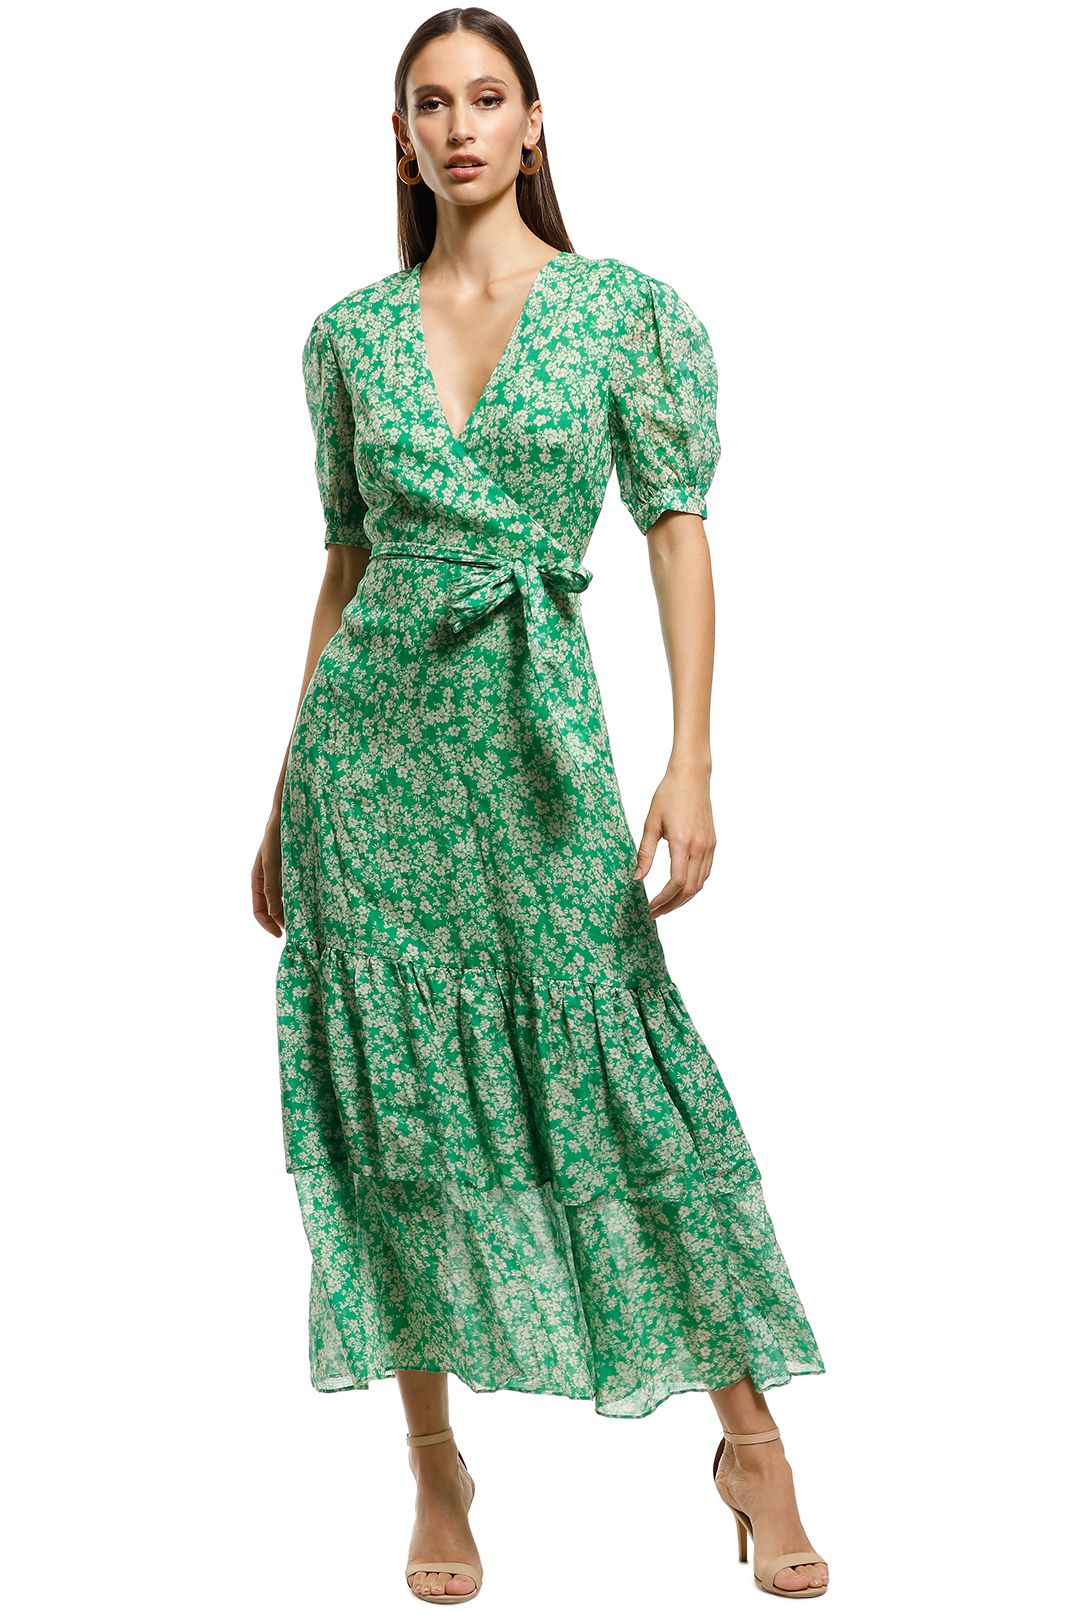 Talulah - Green With Envy Midi Dress - Green - Front